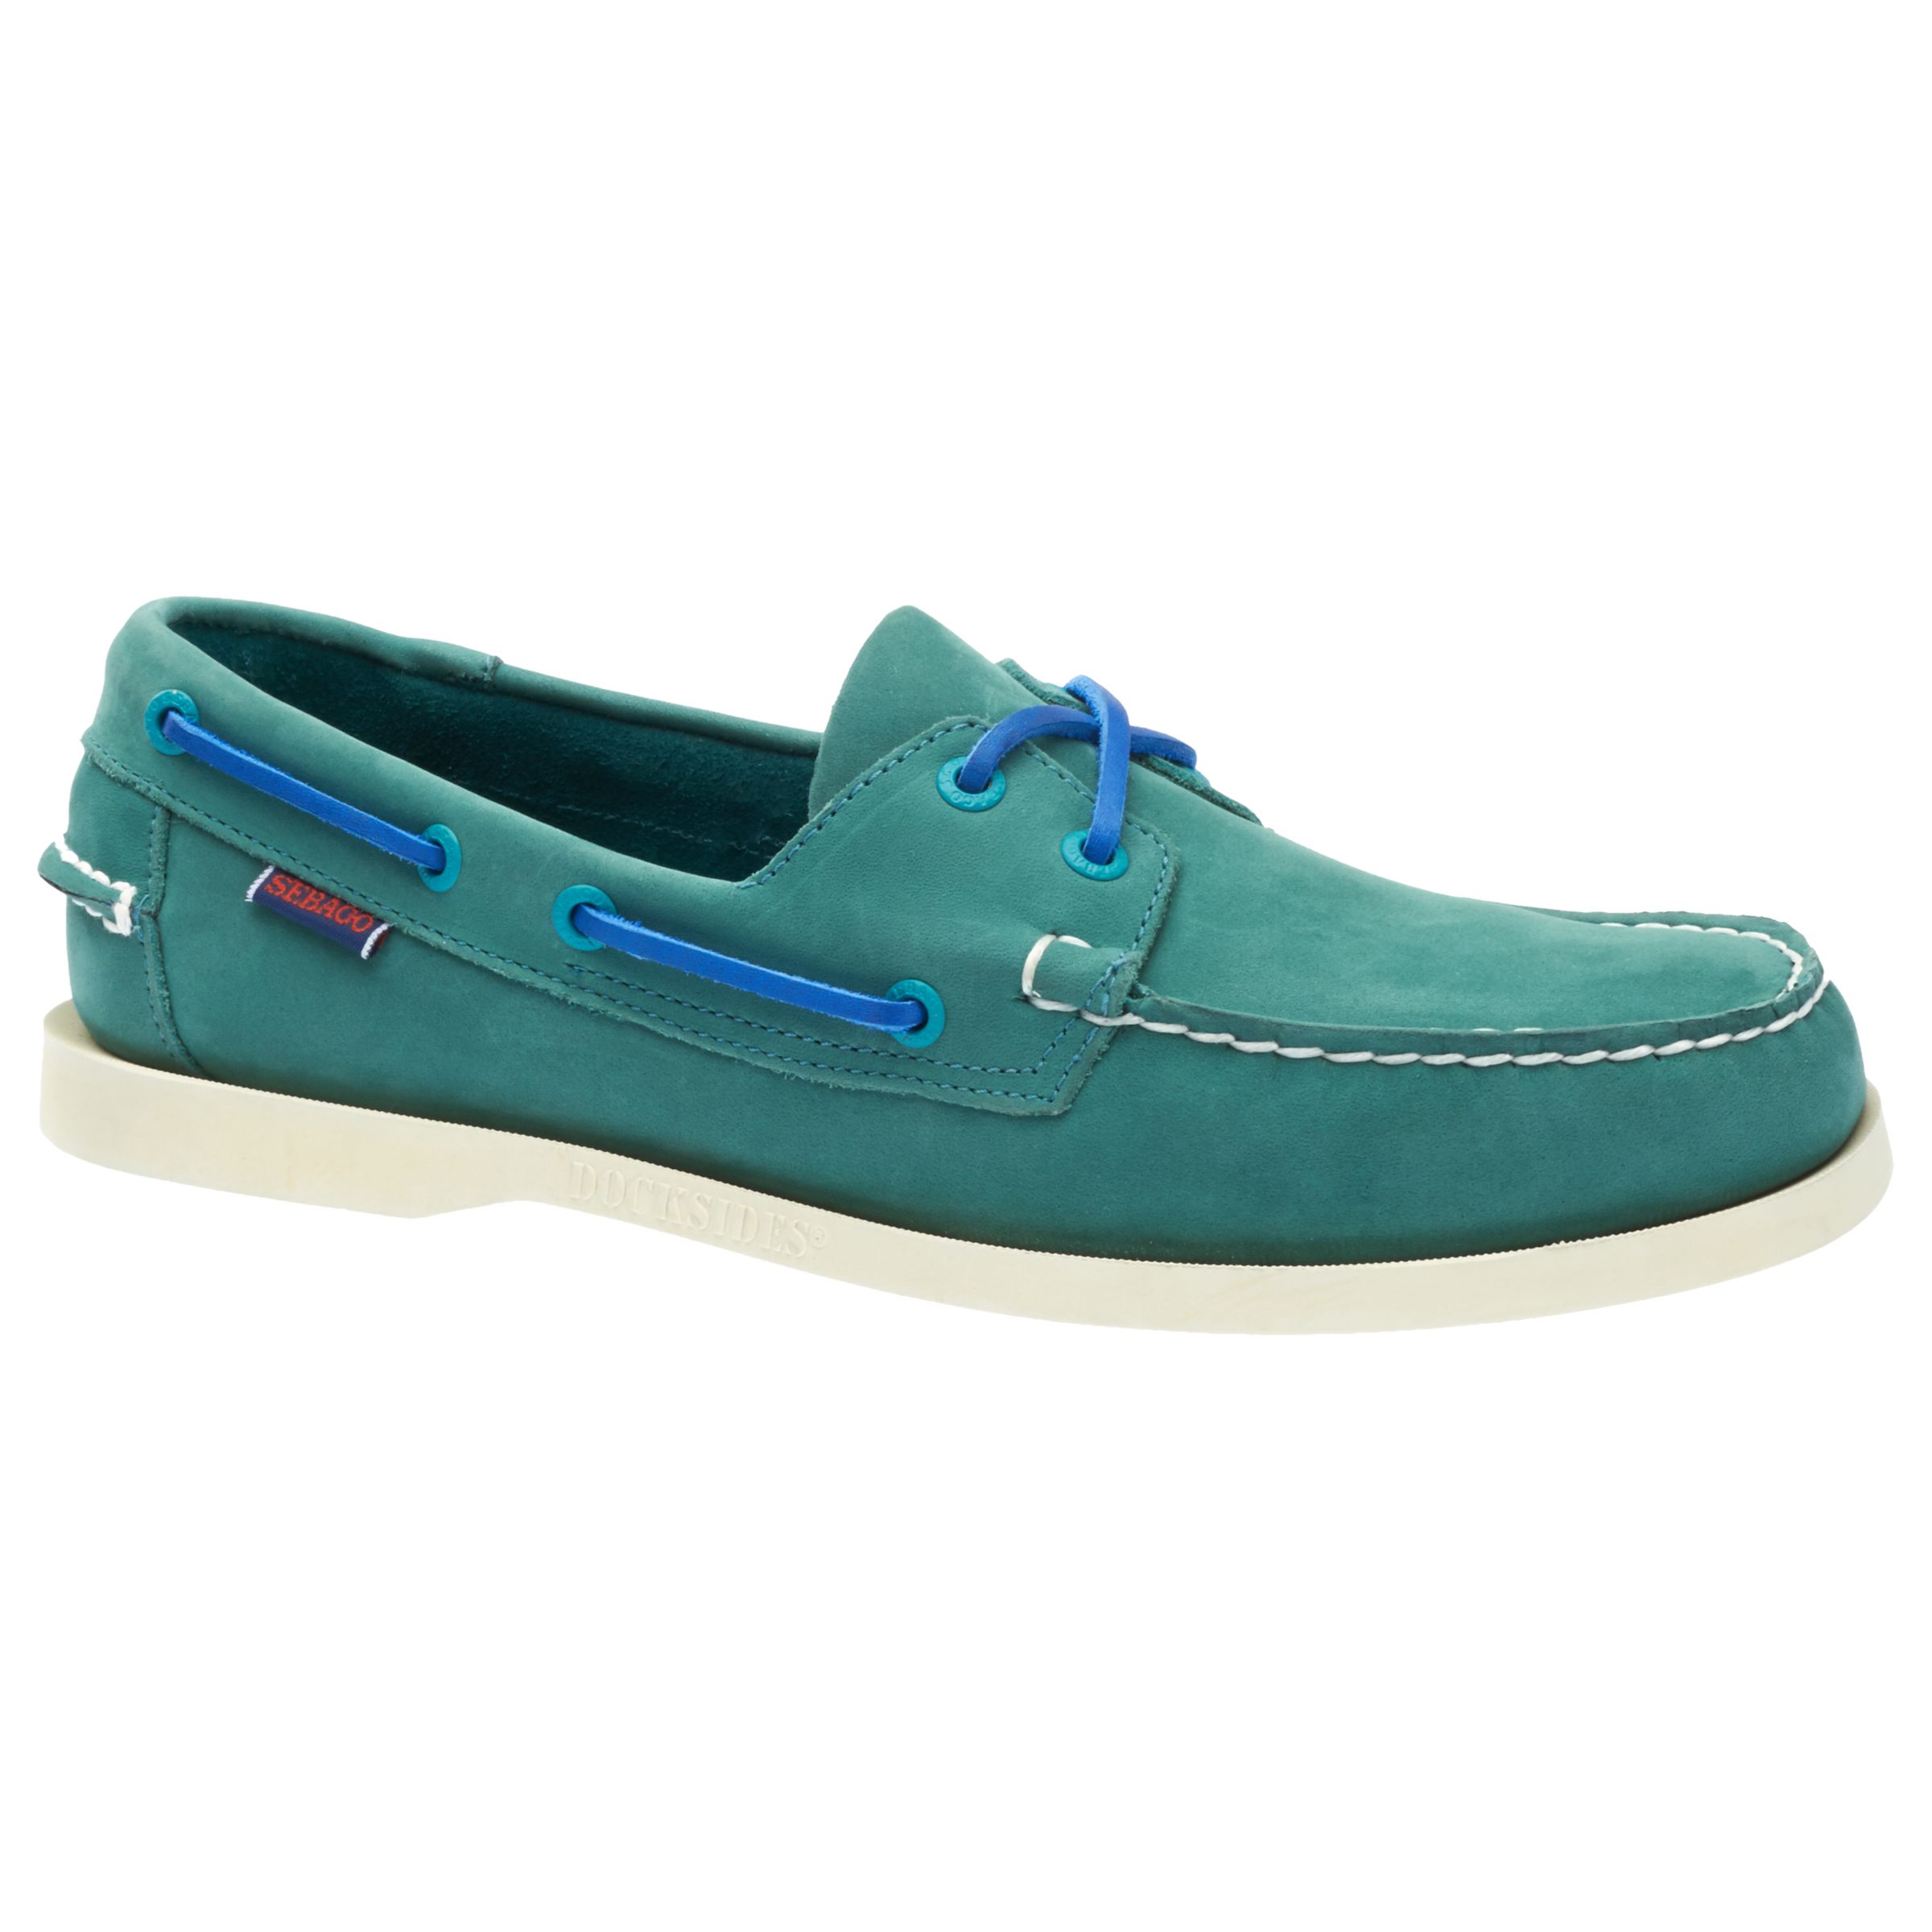 teal boat shoes